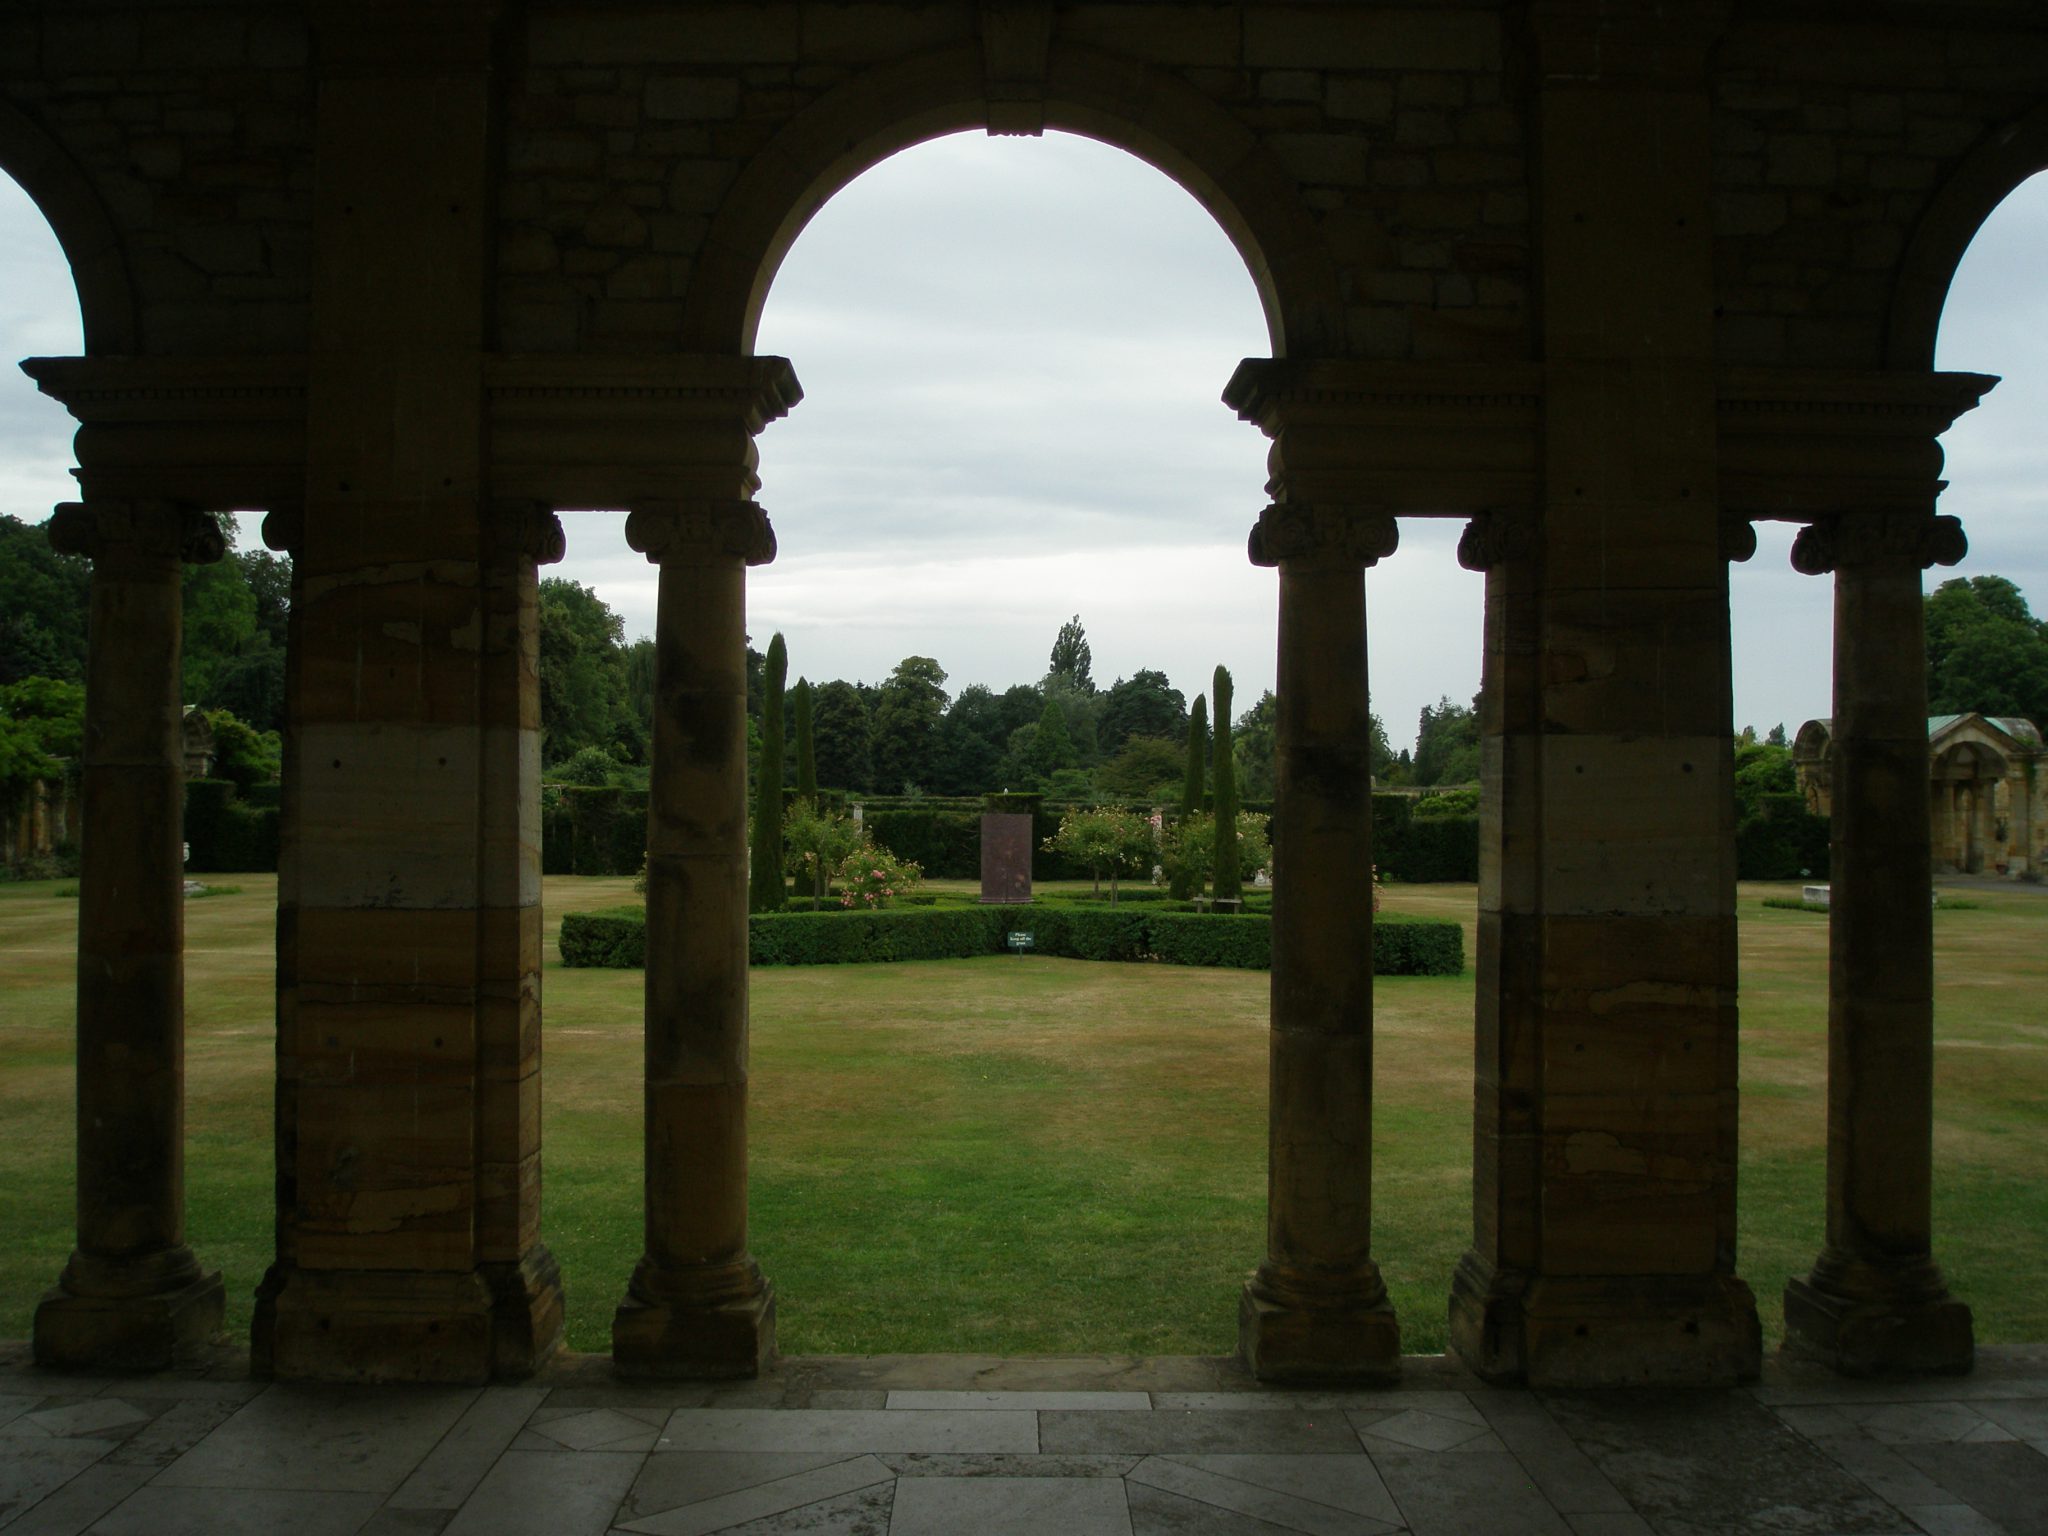 Our view from within the Loggia, across the central green of the Italian Garden